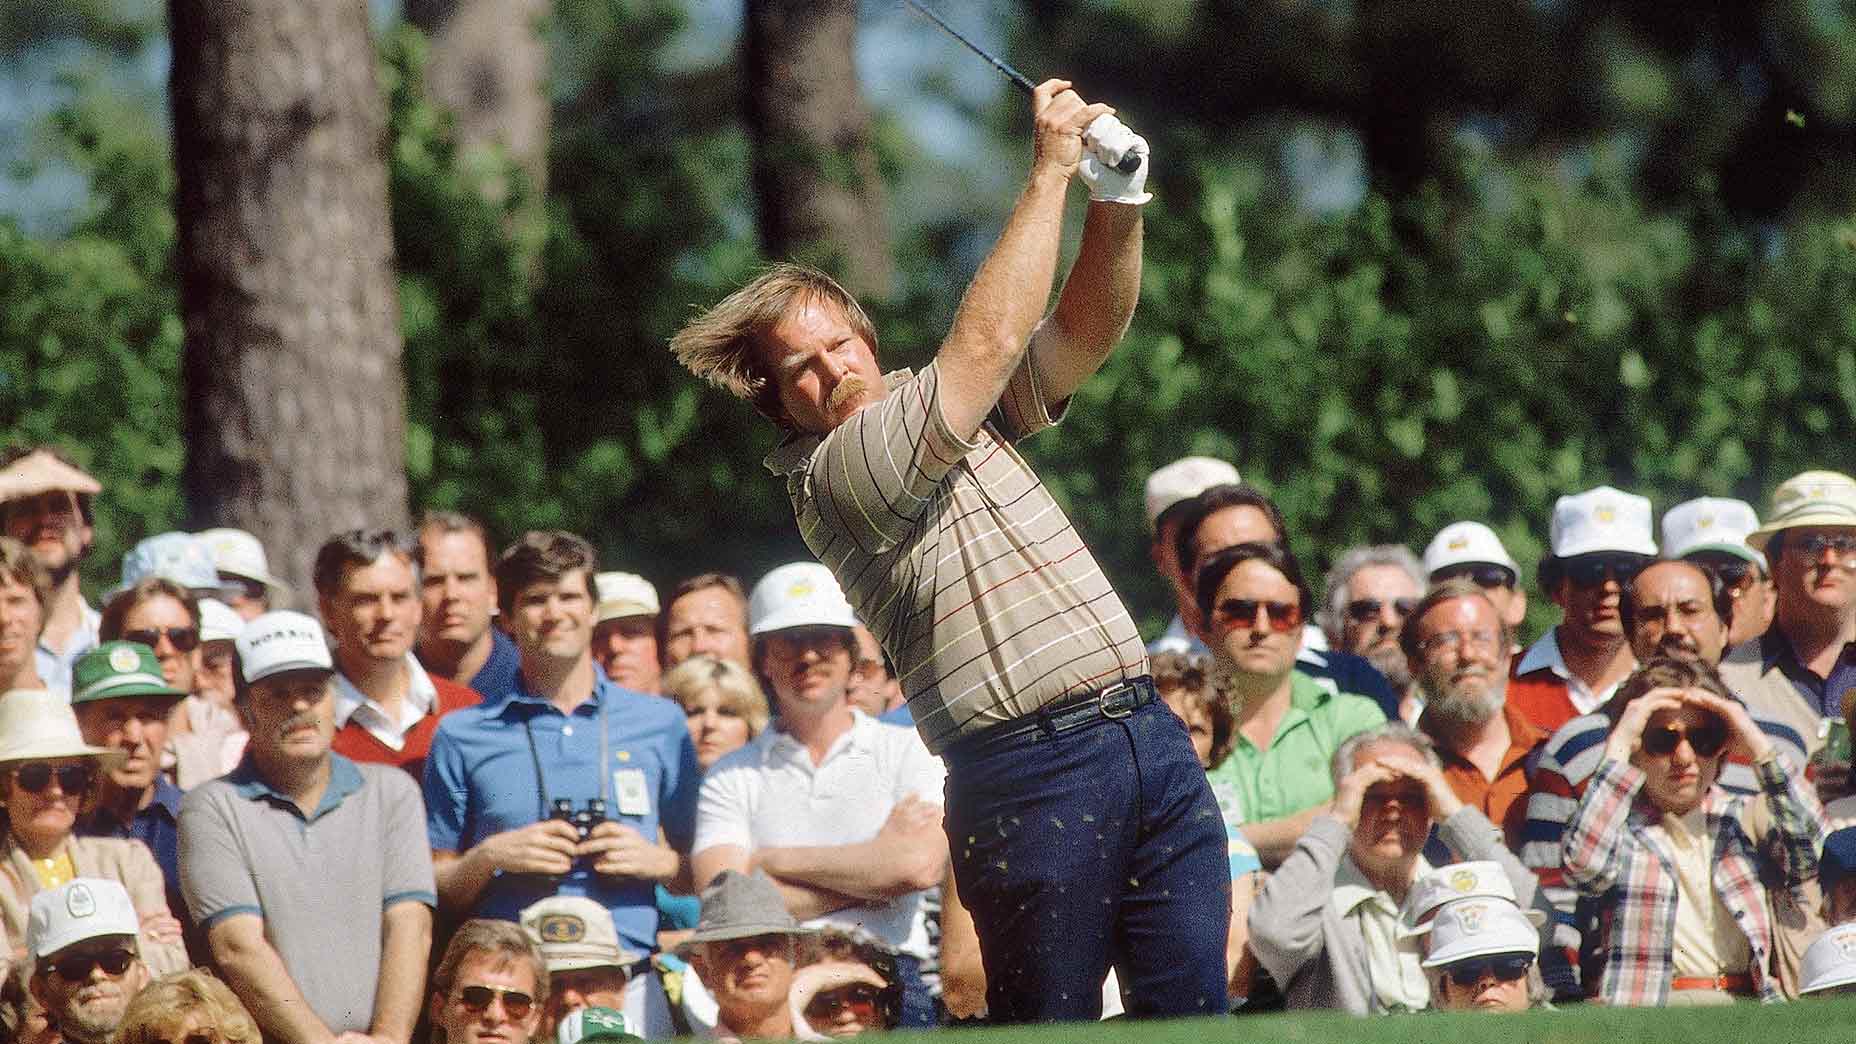 Craig Stadler on Masters memories, and one thing he still hasn't done at Augusta National